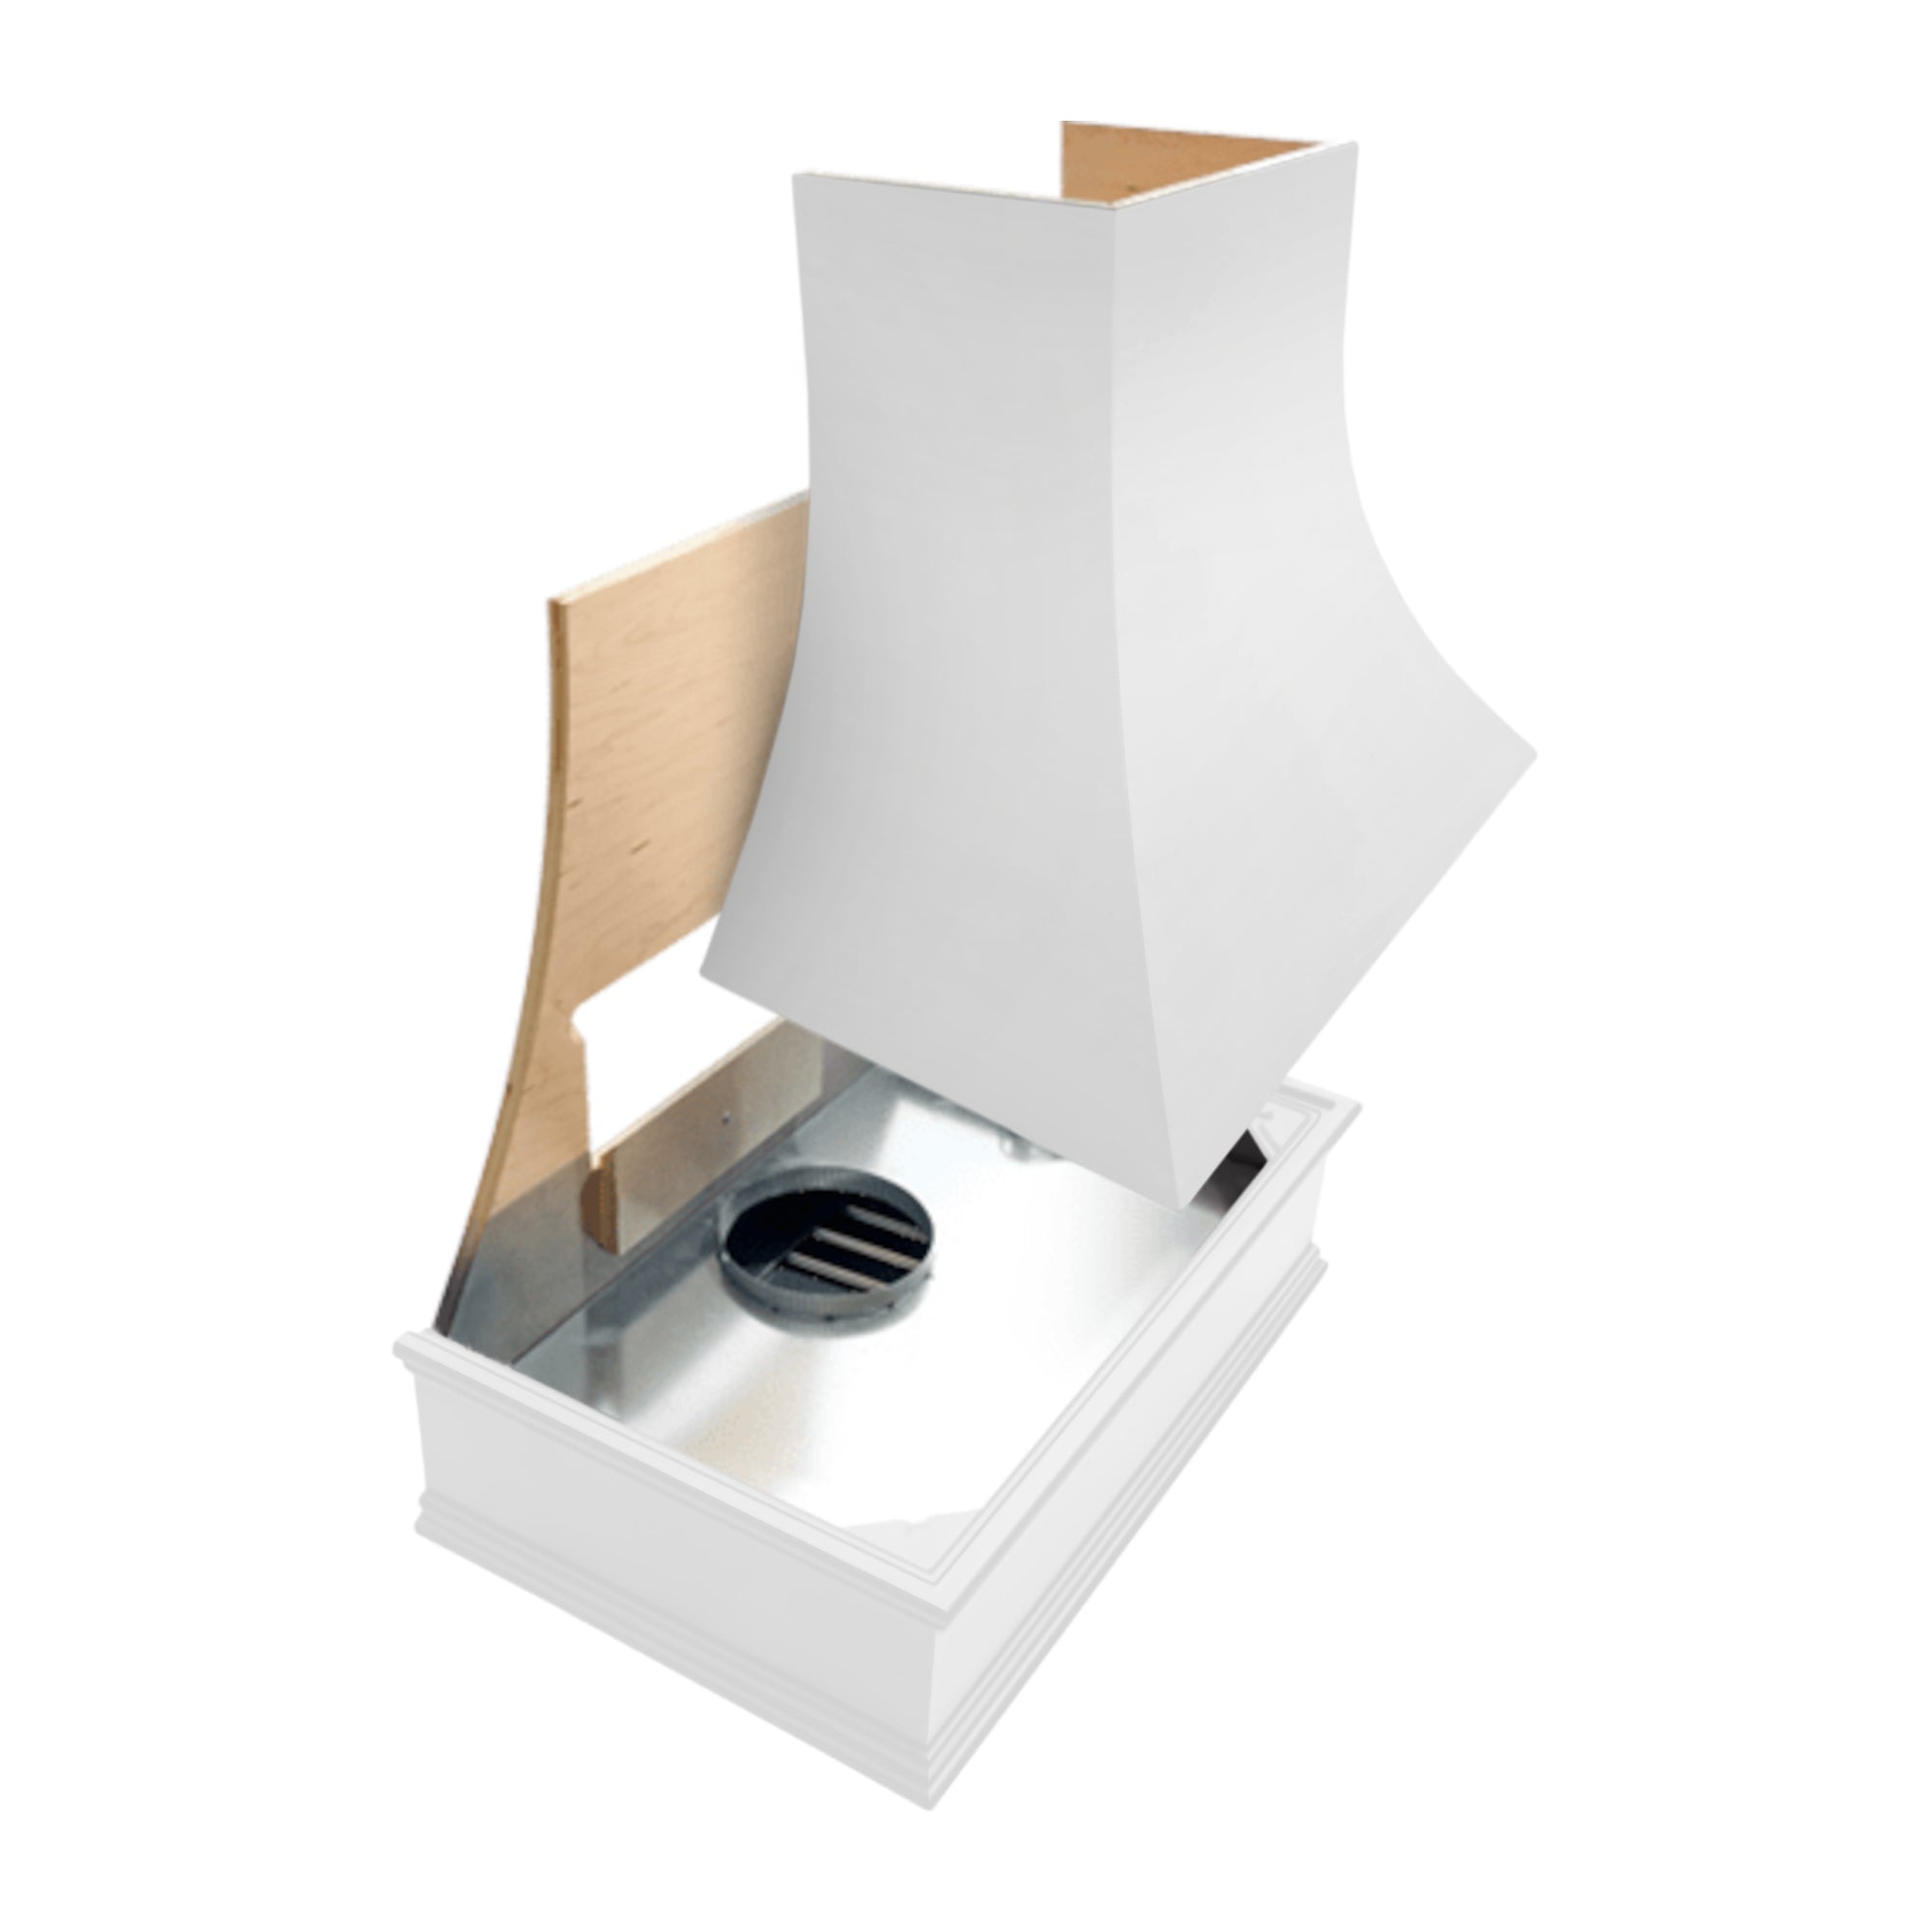 Primed Range Hood With Curved Front, Brass Strapping and Block Trim - 30", 36", 42", 48", 54" and 60" Widths Available